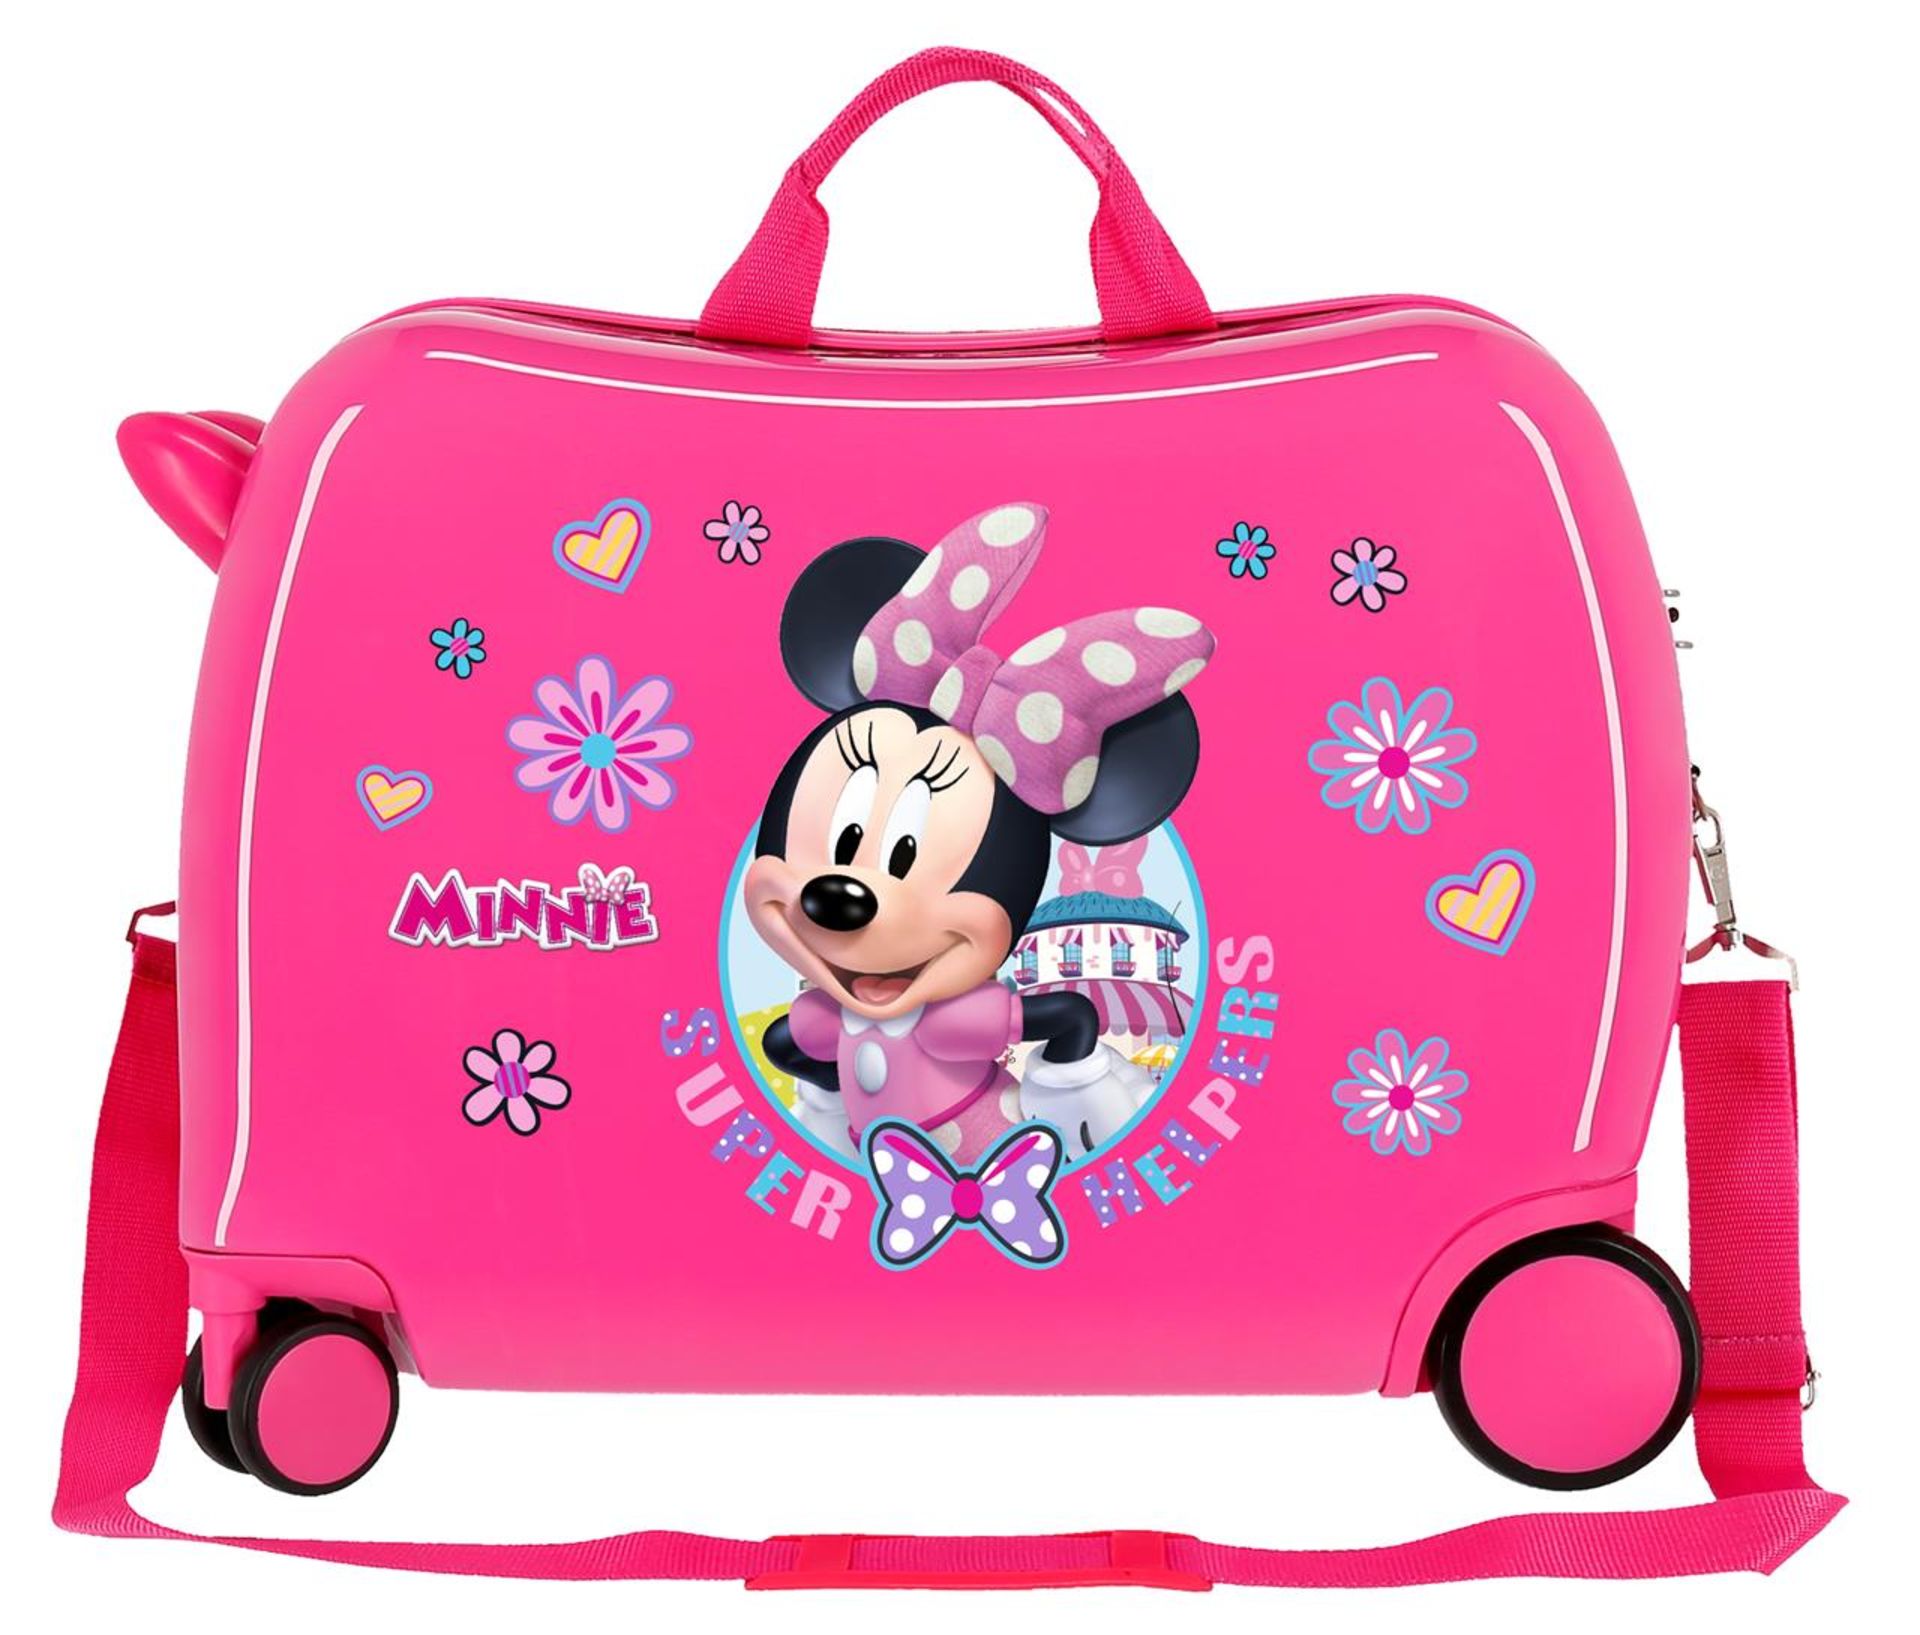 Pallet Of 42 Joumma Bags Rolling Suitcases In Various Disney Designs And Colours 50X38X20 Cm - Image 76 of 102